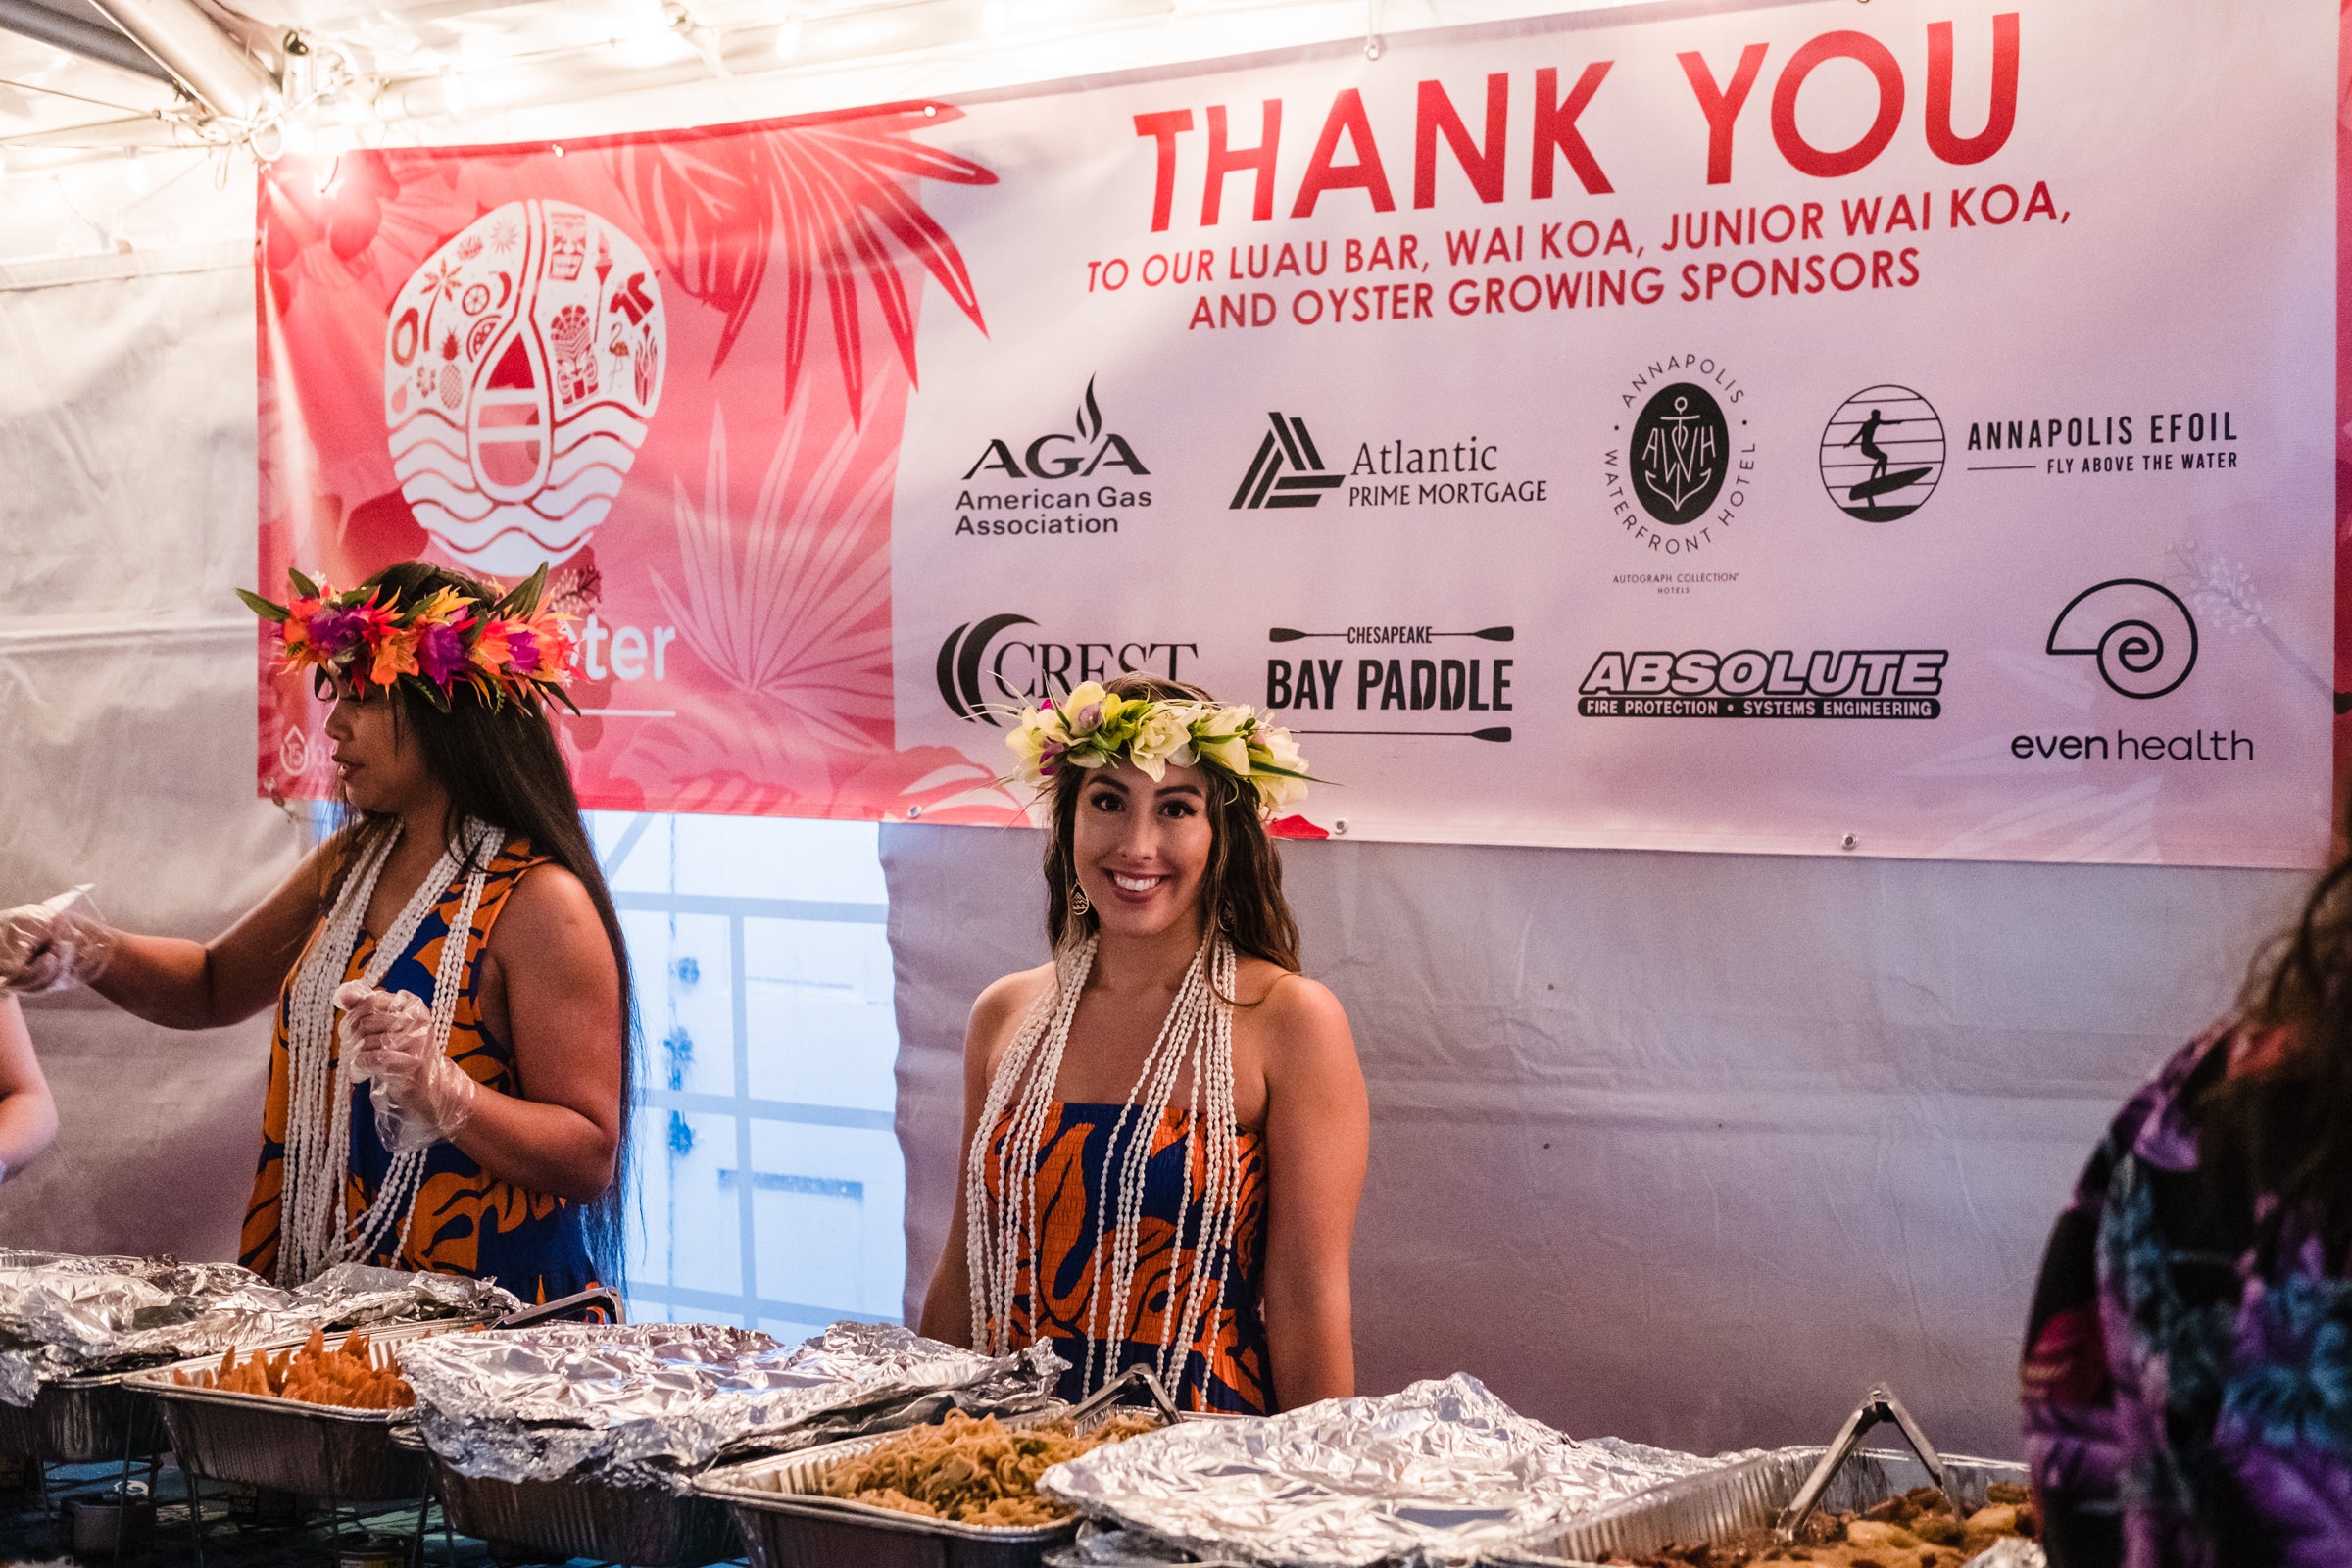 Traditional Hawaiian dancer smiling under a "Thank You" banner